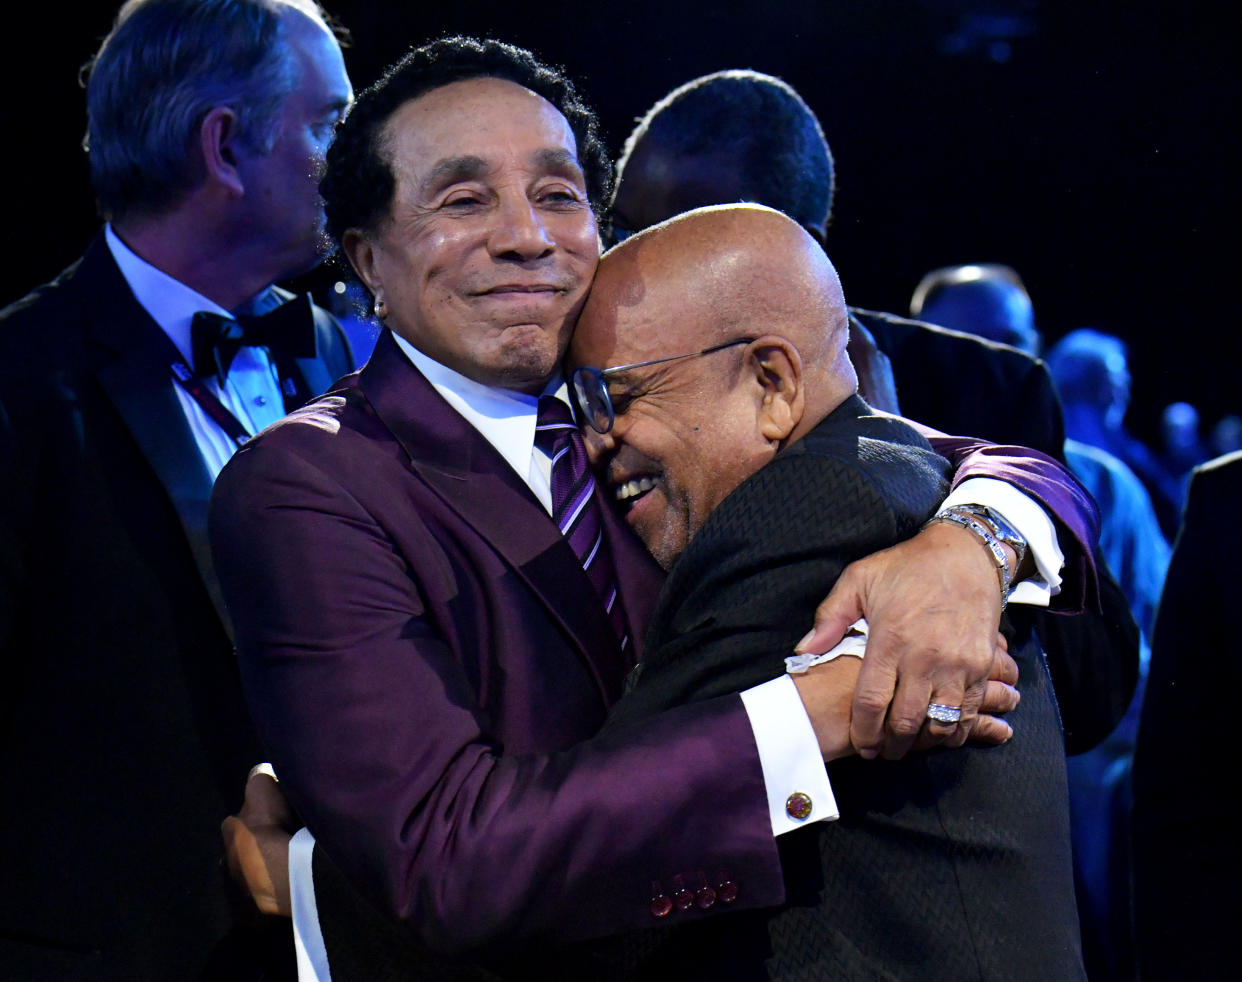 Honorees Smokey Robinson and Berry Gordy attend MusiCares Persons of the Year Honoring Berry Gordy and Smokey Robinson at Los Angeles Convention Center on Feb. 3, 2023 in Los Angeles, Calif. (Photo: Lester Cohen/Getty Images for The Recording Academy)